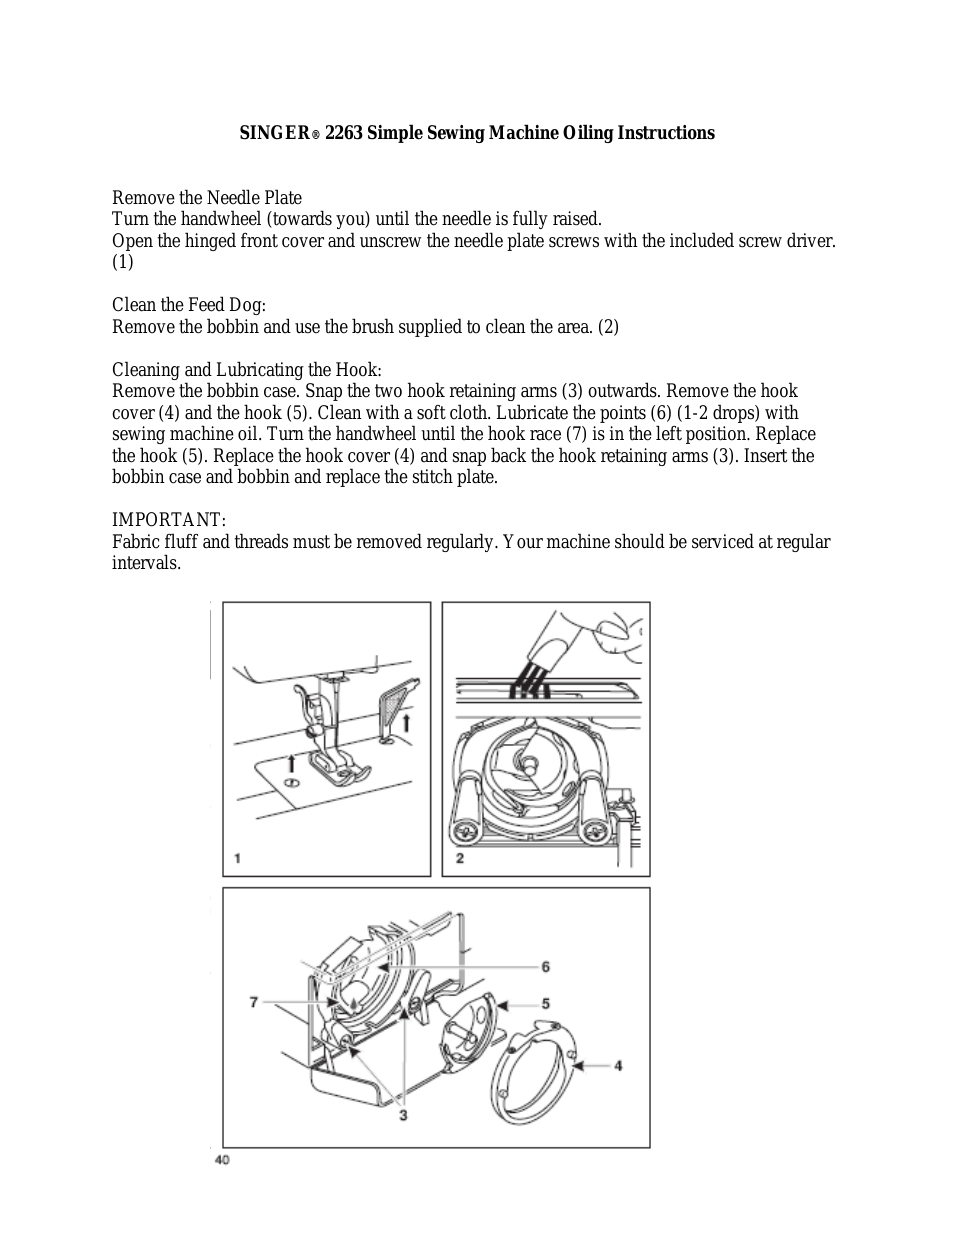 2263 Oiling SIMPLE Instruction Manual (Page 1)